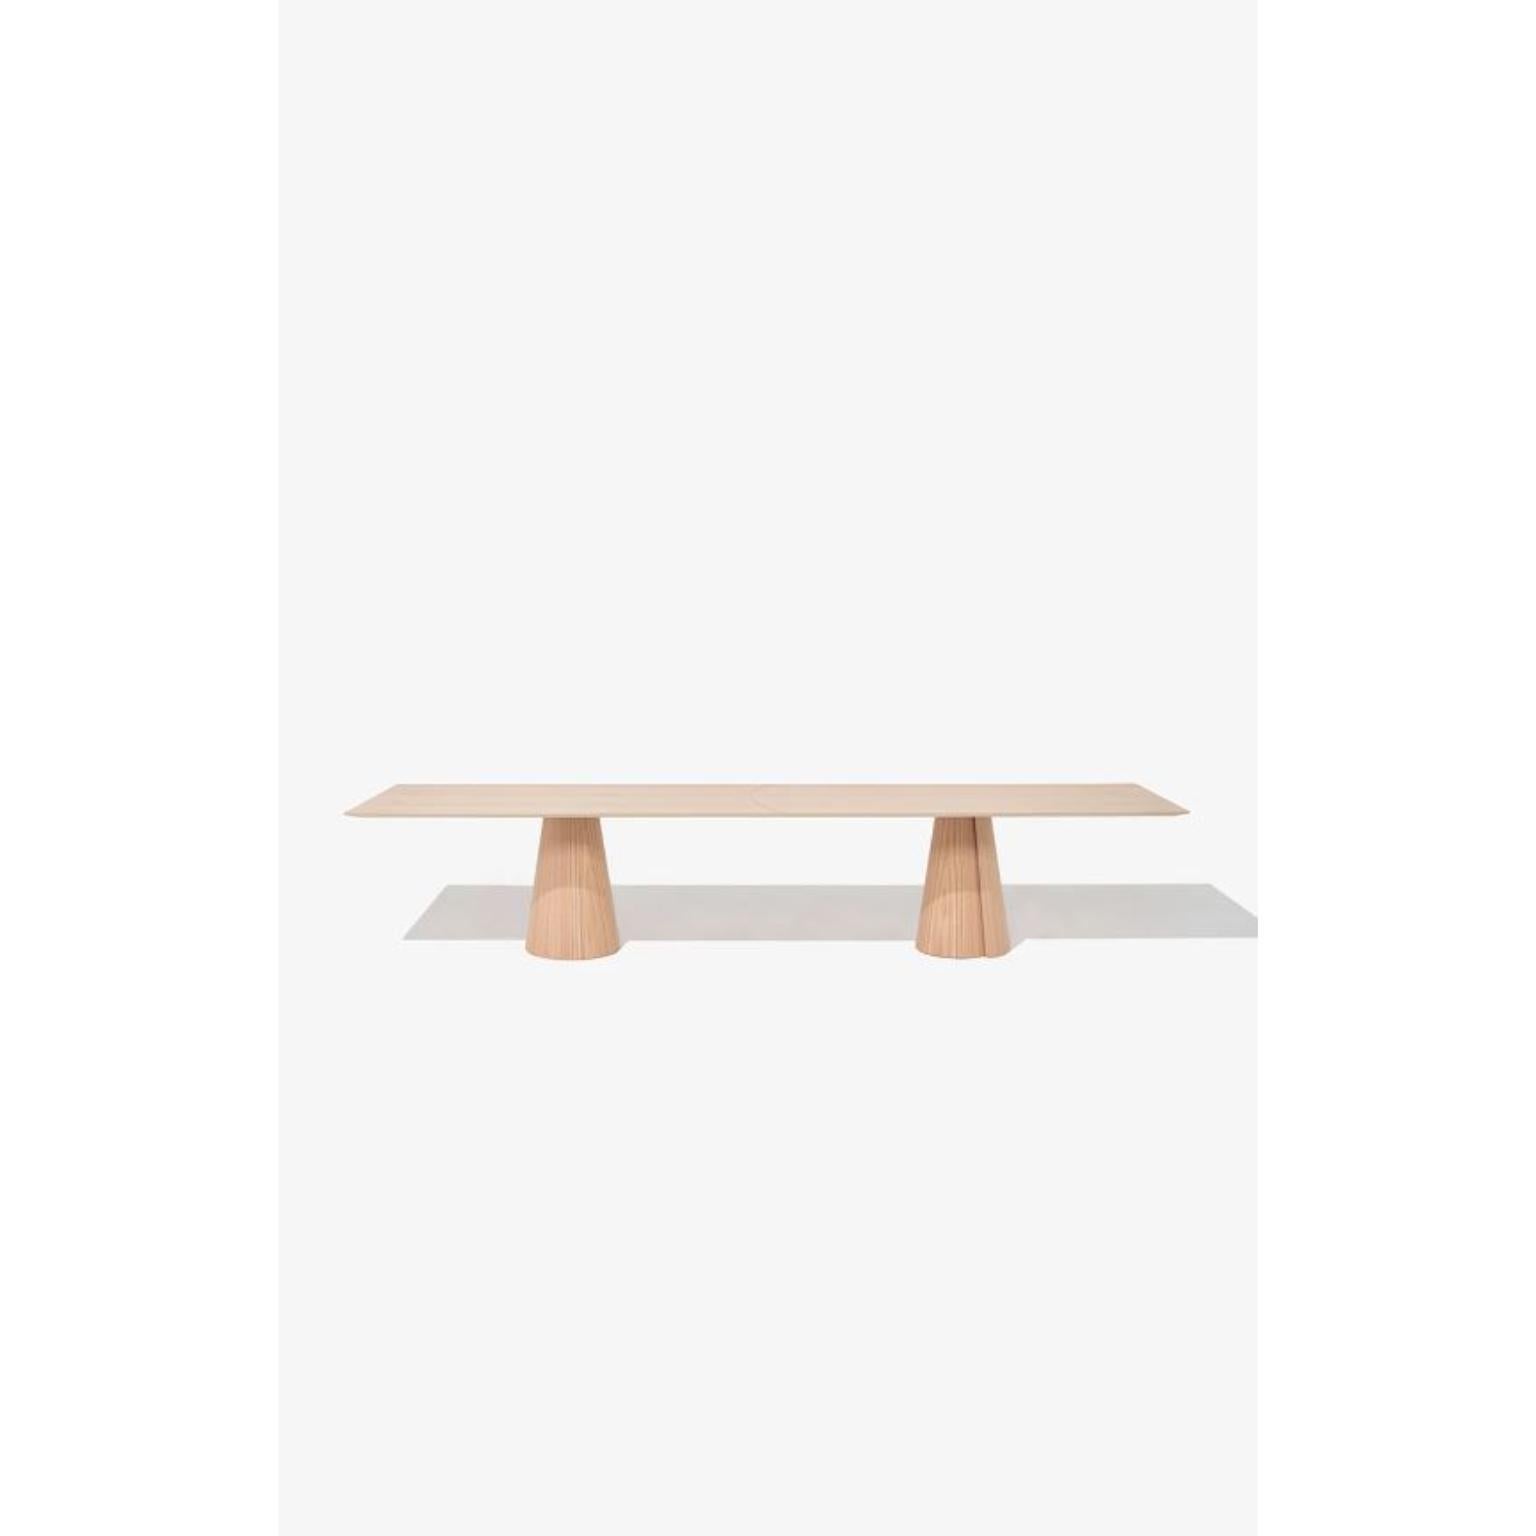 400 Volta Rectangular Dining Table by Wentz
Dimensions: D 120 x W 400 x H 75 cm
Materials: Wood, Plywood, MDF, Natural Wood Veneer, Steel.
Also available in different colors: Oak, Walnut, Black, White, Leaf Green.

The Volta table references nature